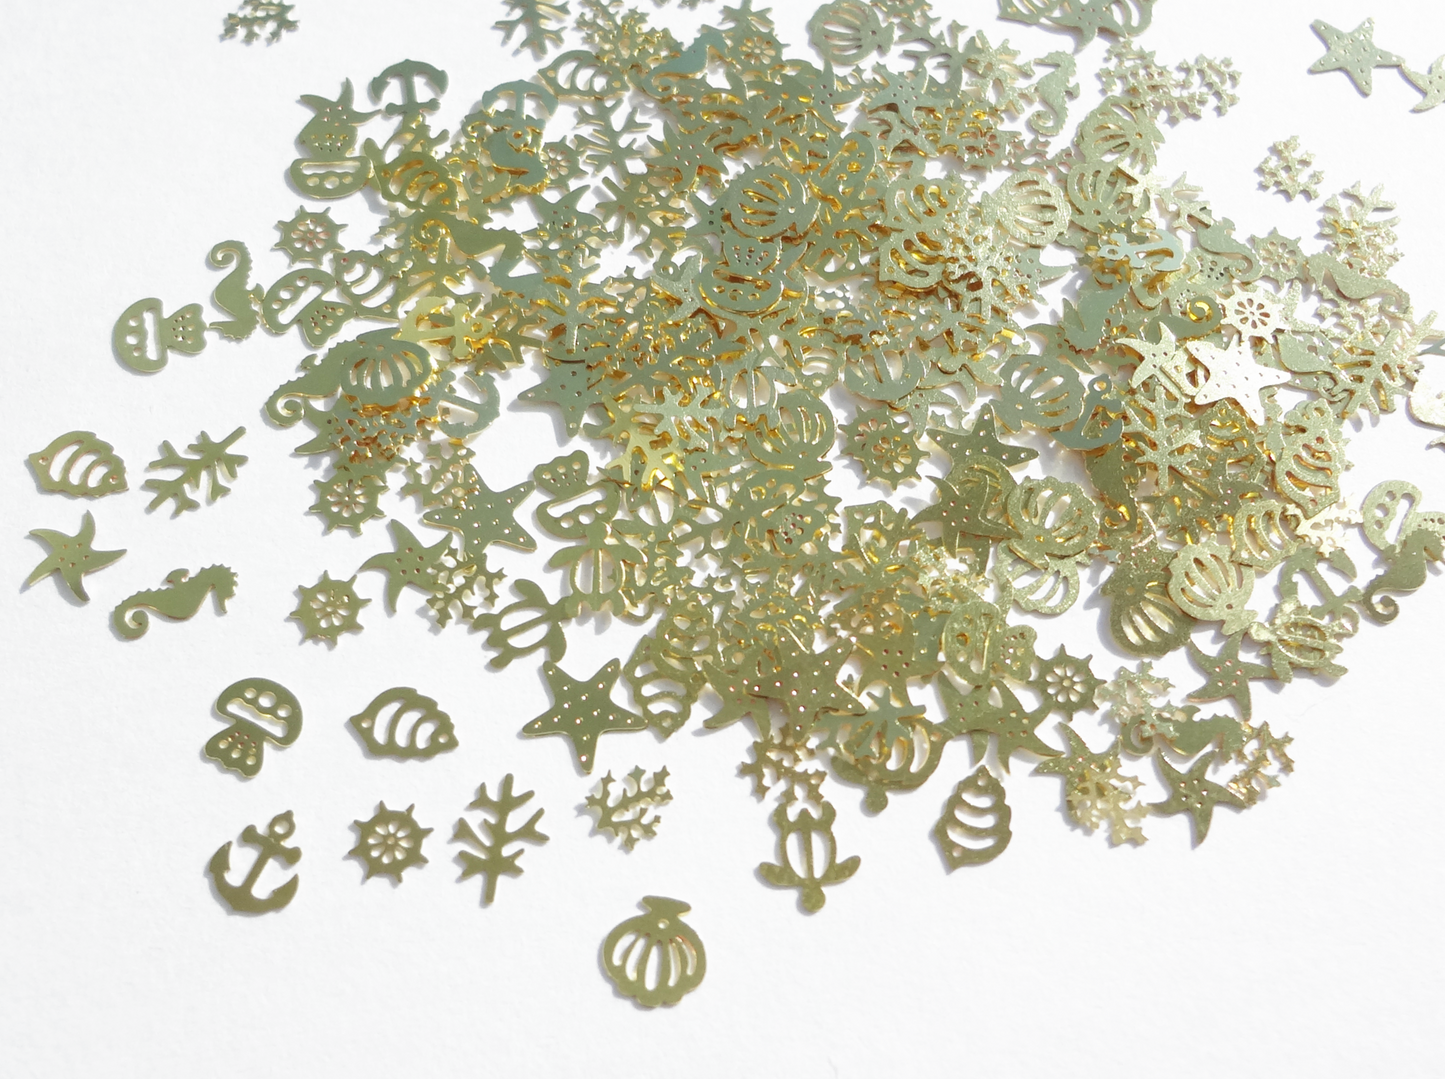 3mm to 6mm Gold Mixed Metal Ocean Life, Nail Art Slices